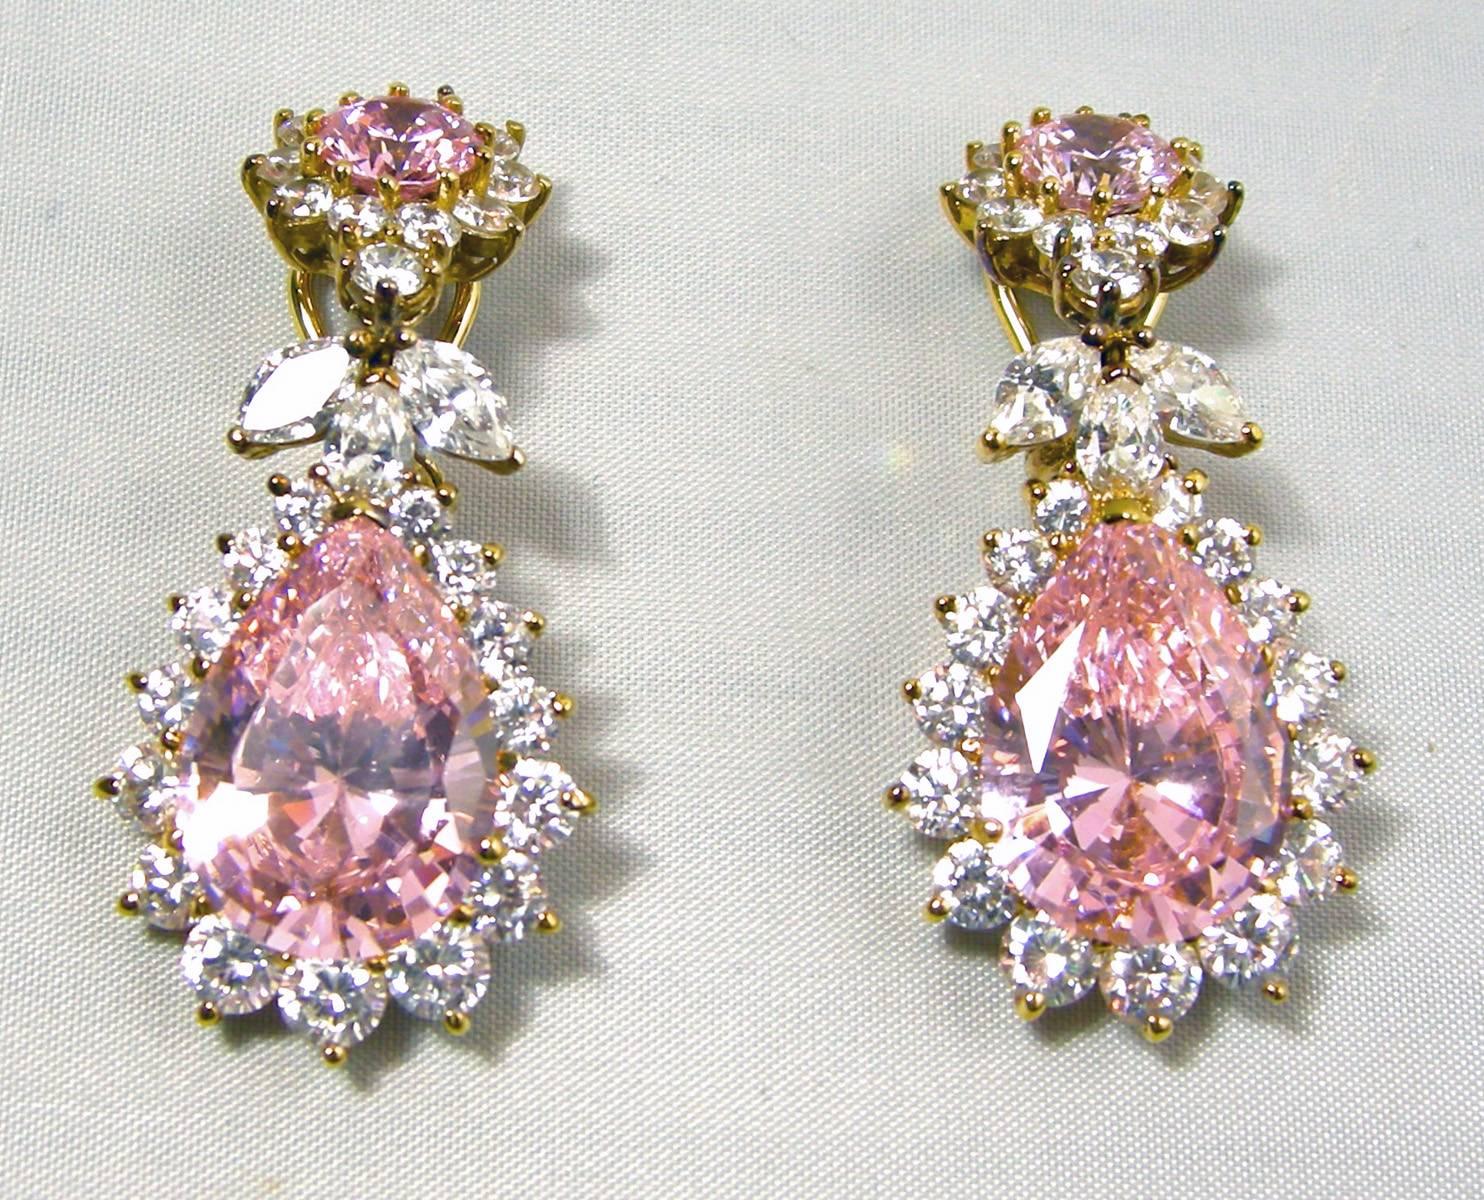 When I first saw these earrings, I thought they were real pink sapphires.  That’s how beautifully designed these clip earrings are.  The top has a round pink faux sapphire surrounded by brilliant crystals.  The top has three marquis shaped crystals